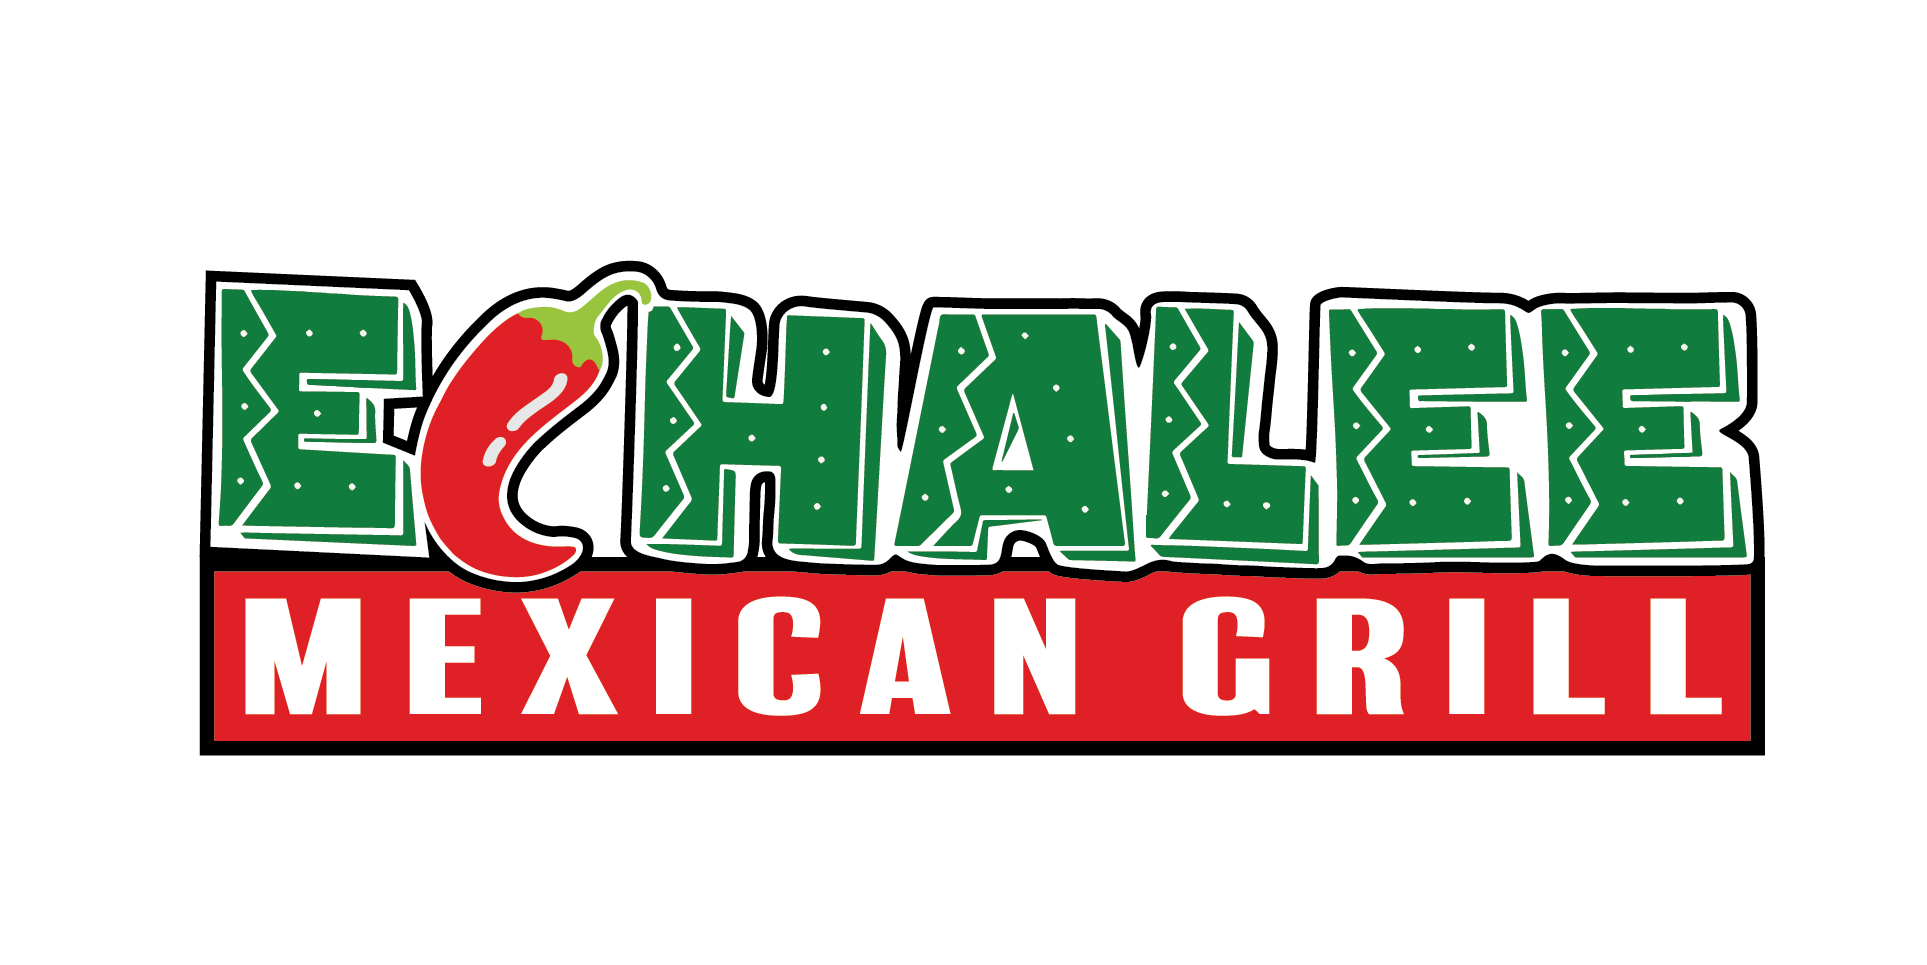 Echalee Mexican Grill logo